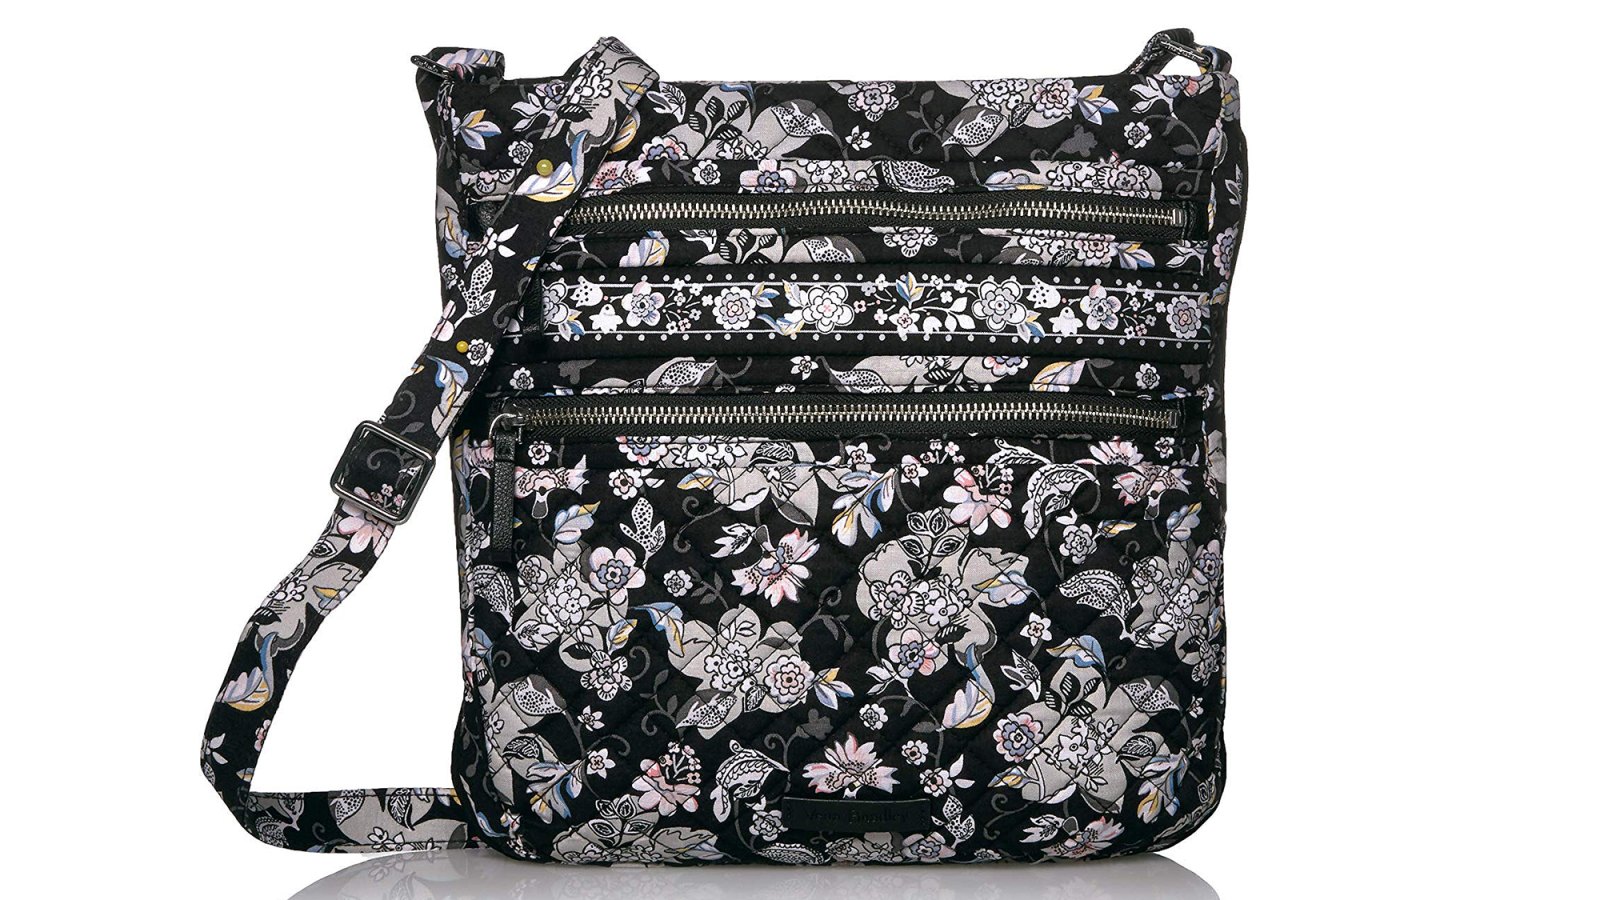 This Vera Bradley Triple Zip Crossbody Comes in Nearly 50 Colors